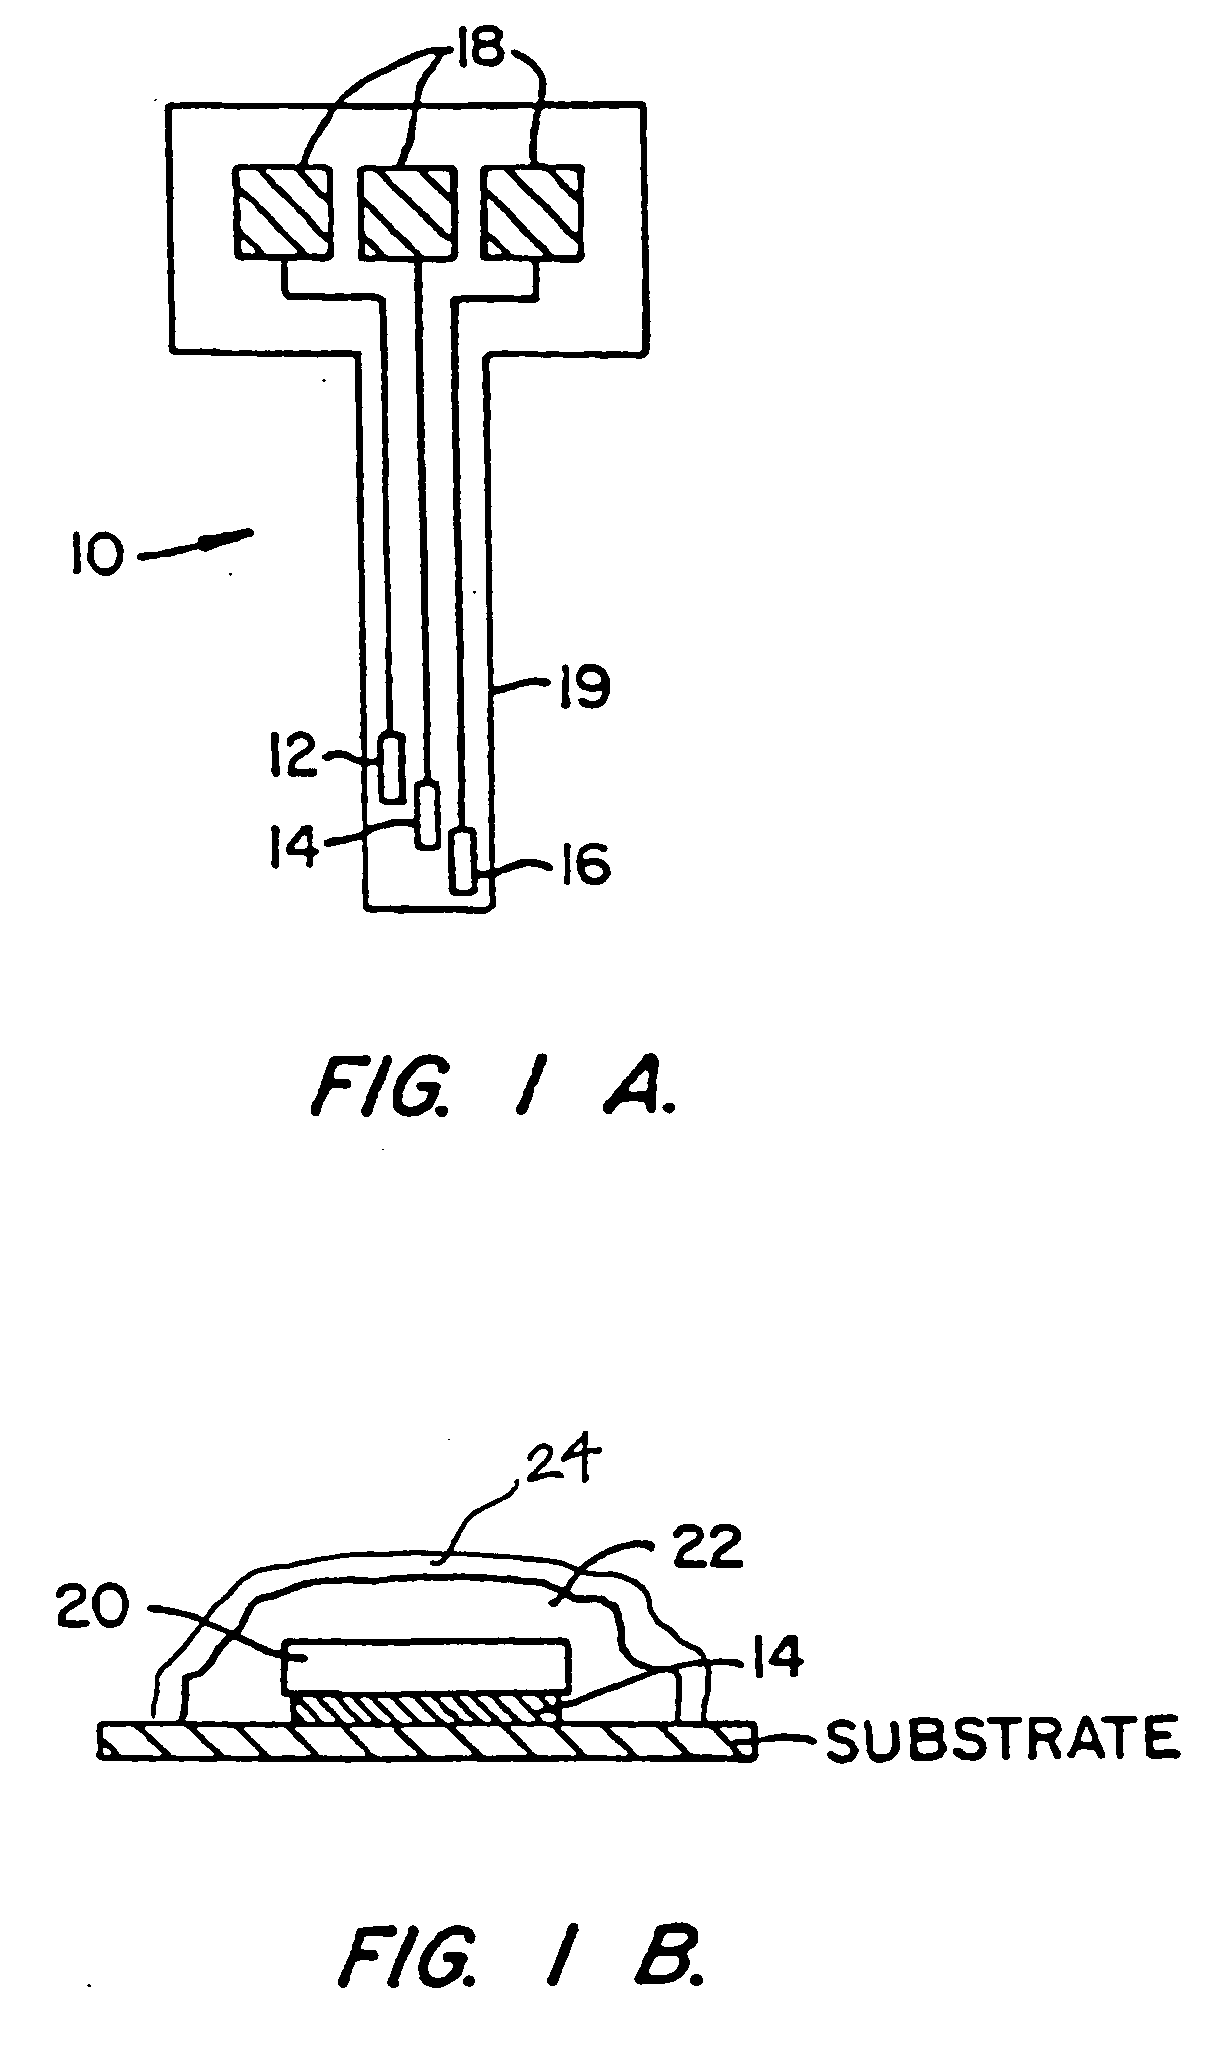 Methods and materials for stabilizing analyte sensors